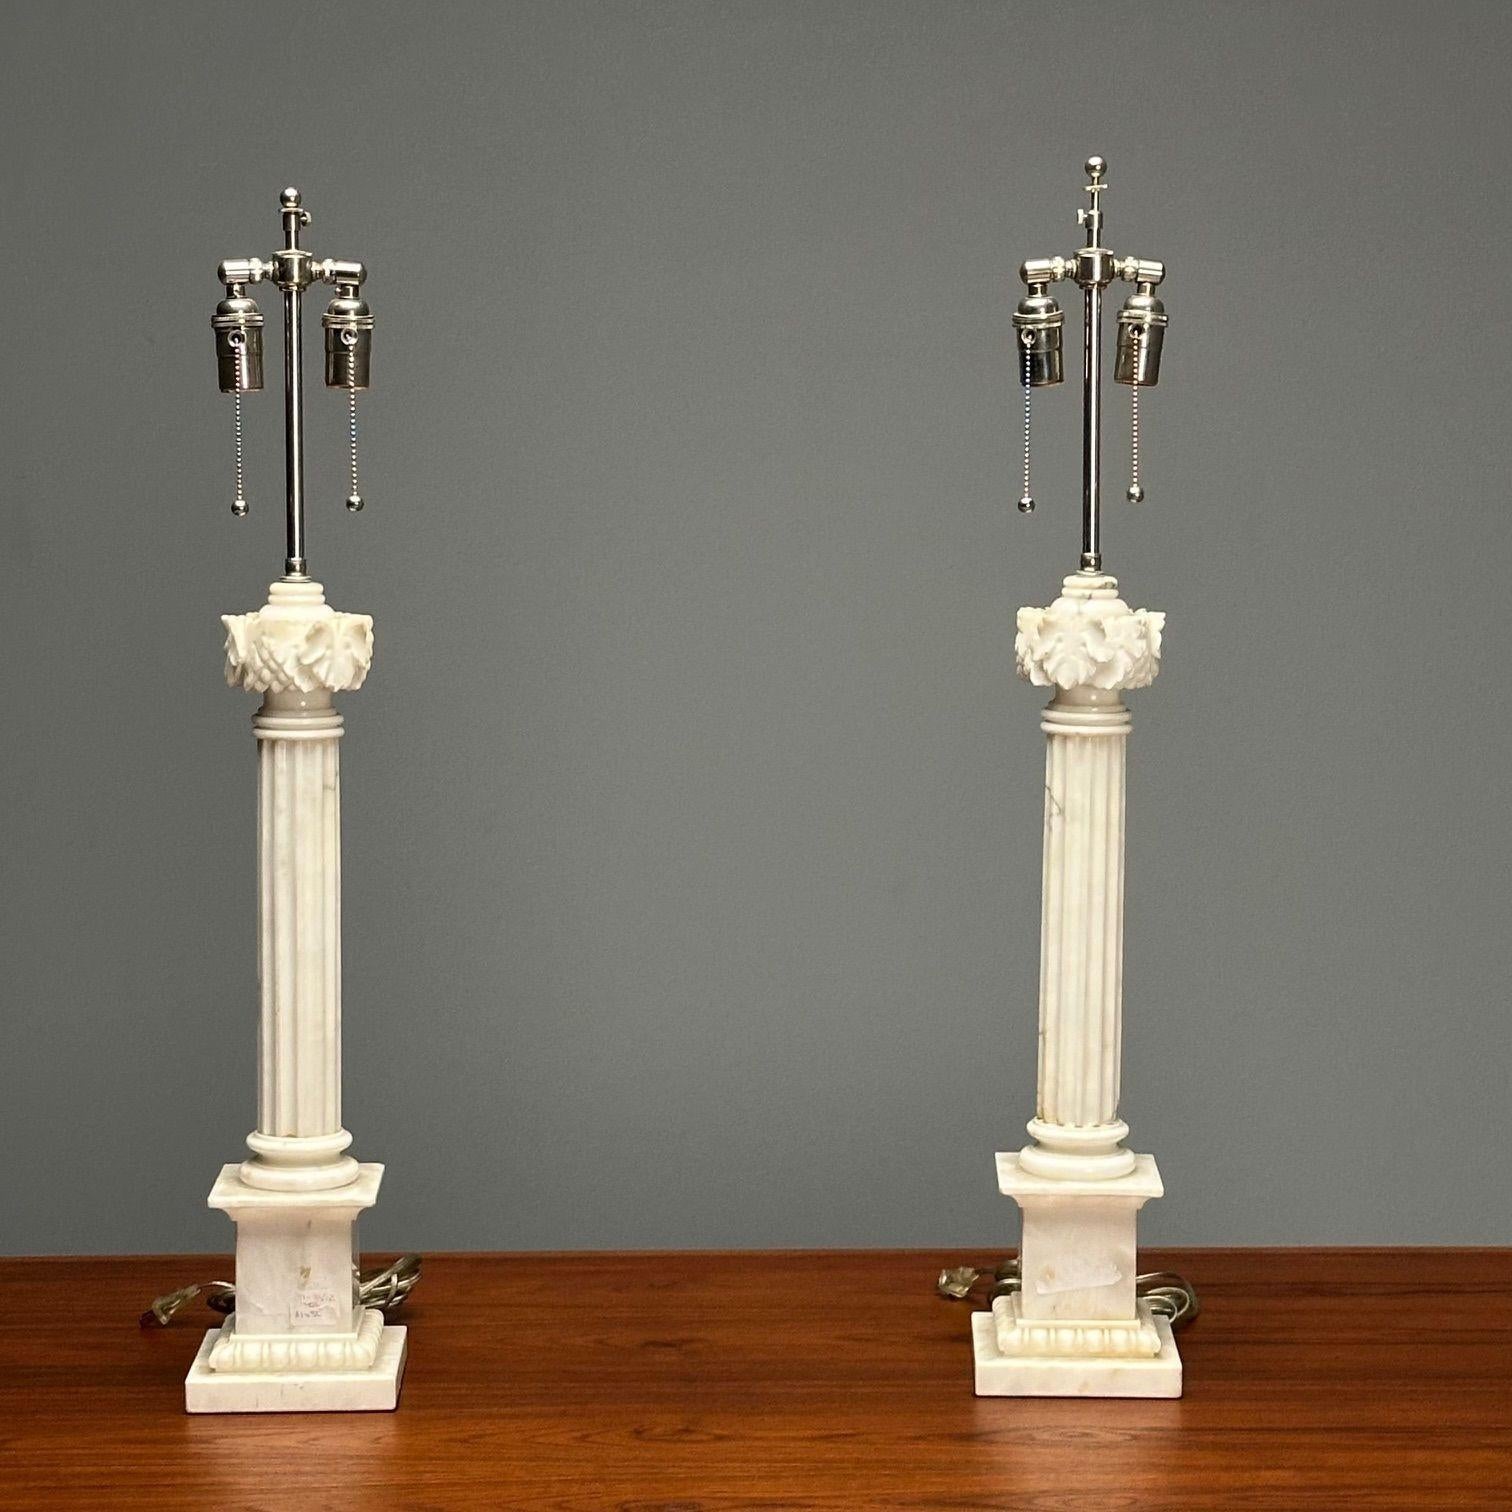 Italian Neoclassical, Corinthian Column Form Table Lamps, Marble, Italy, 1950s

A pair of heavy, solid marble, Corinthian Column form table lamps. One has a small and insignificant chip on the base.
Lamp shades not included.

Marble, Chrome
Italy,